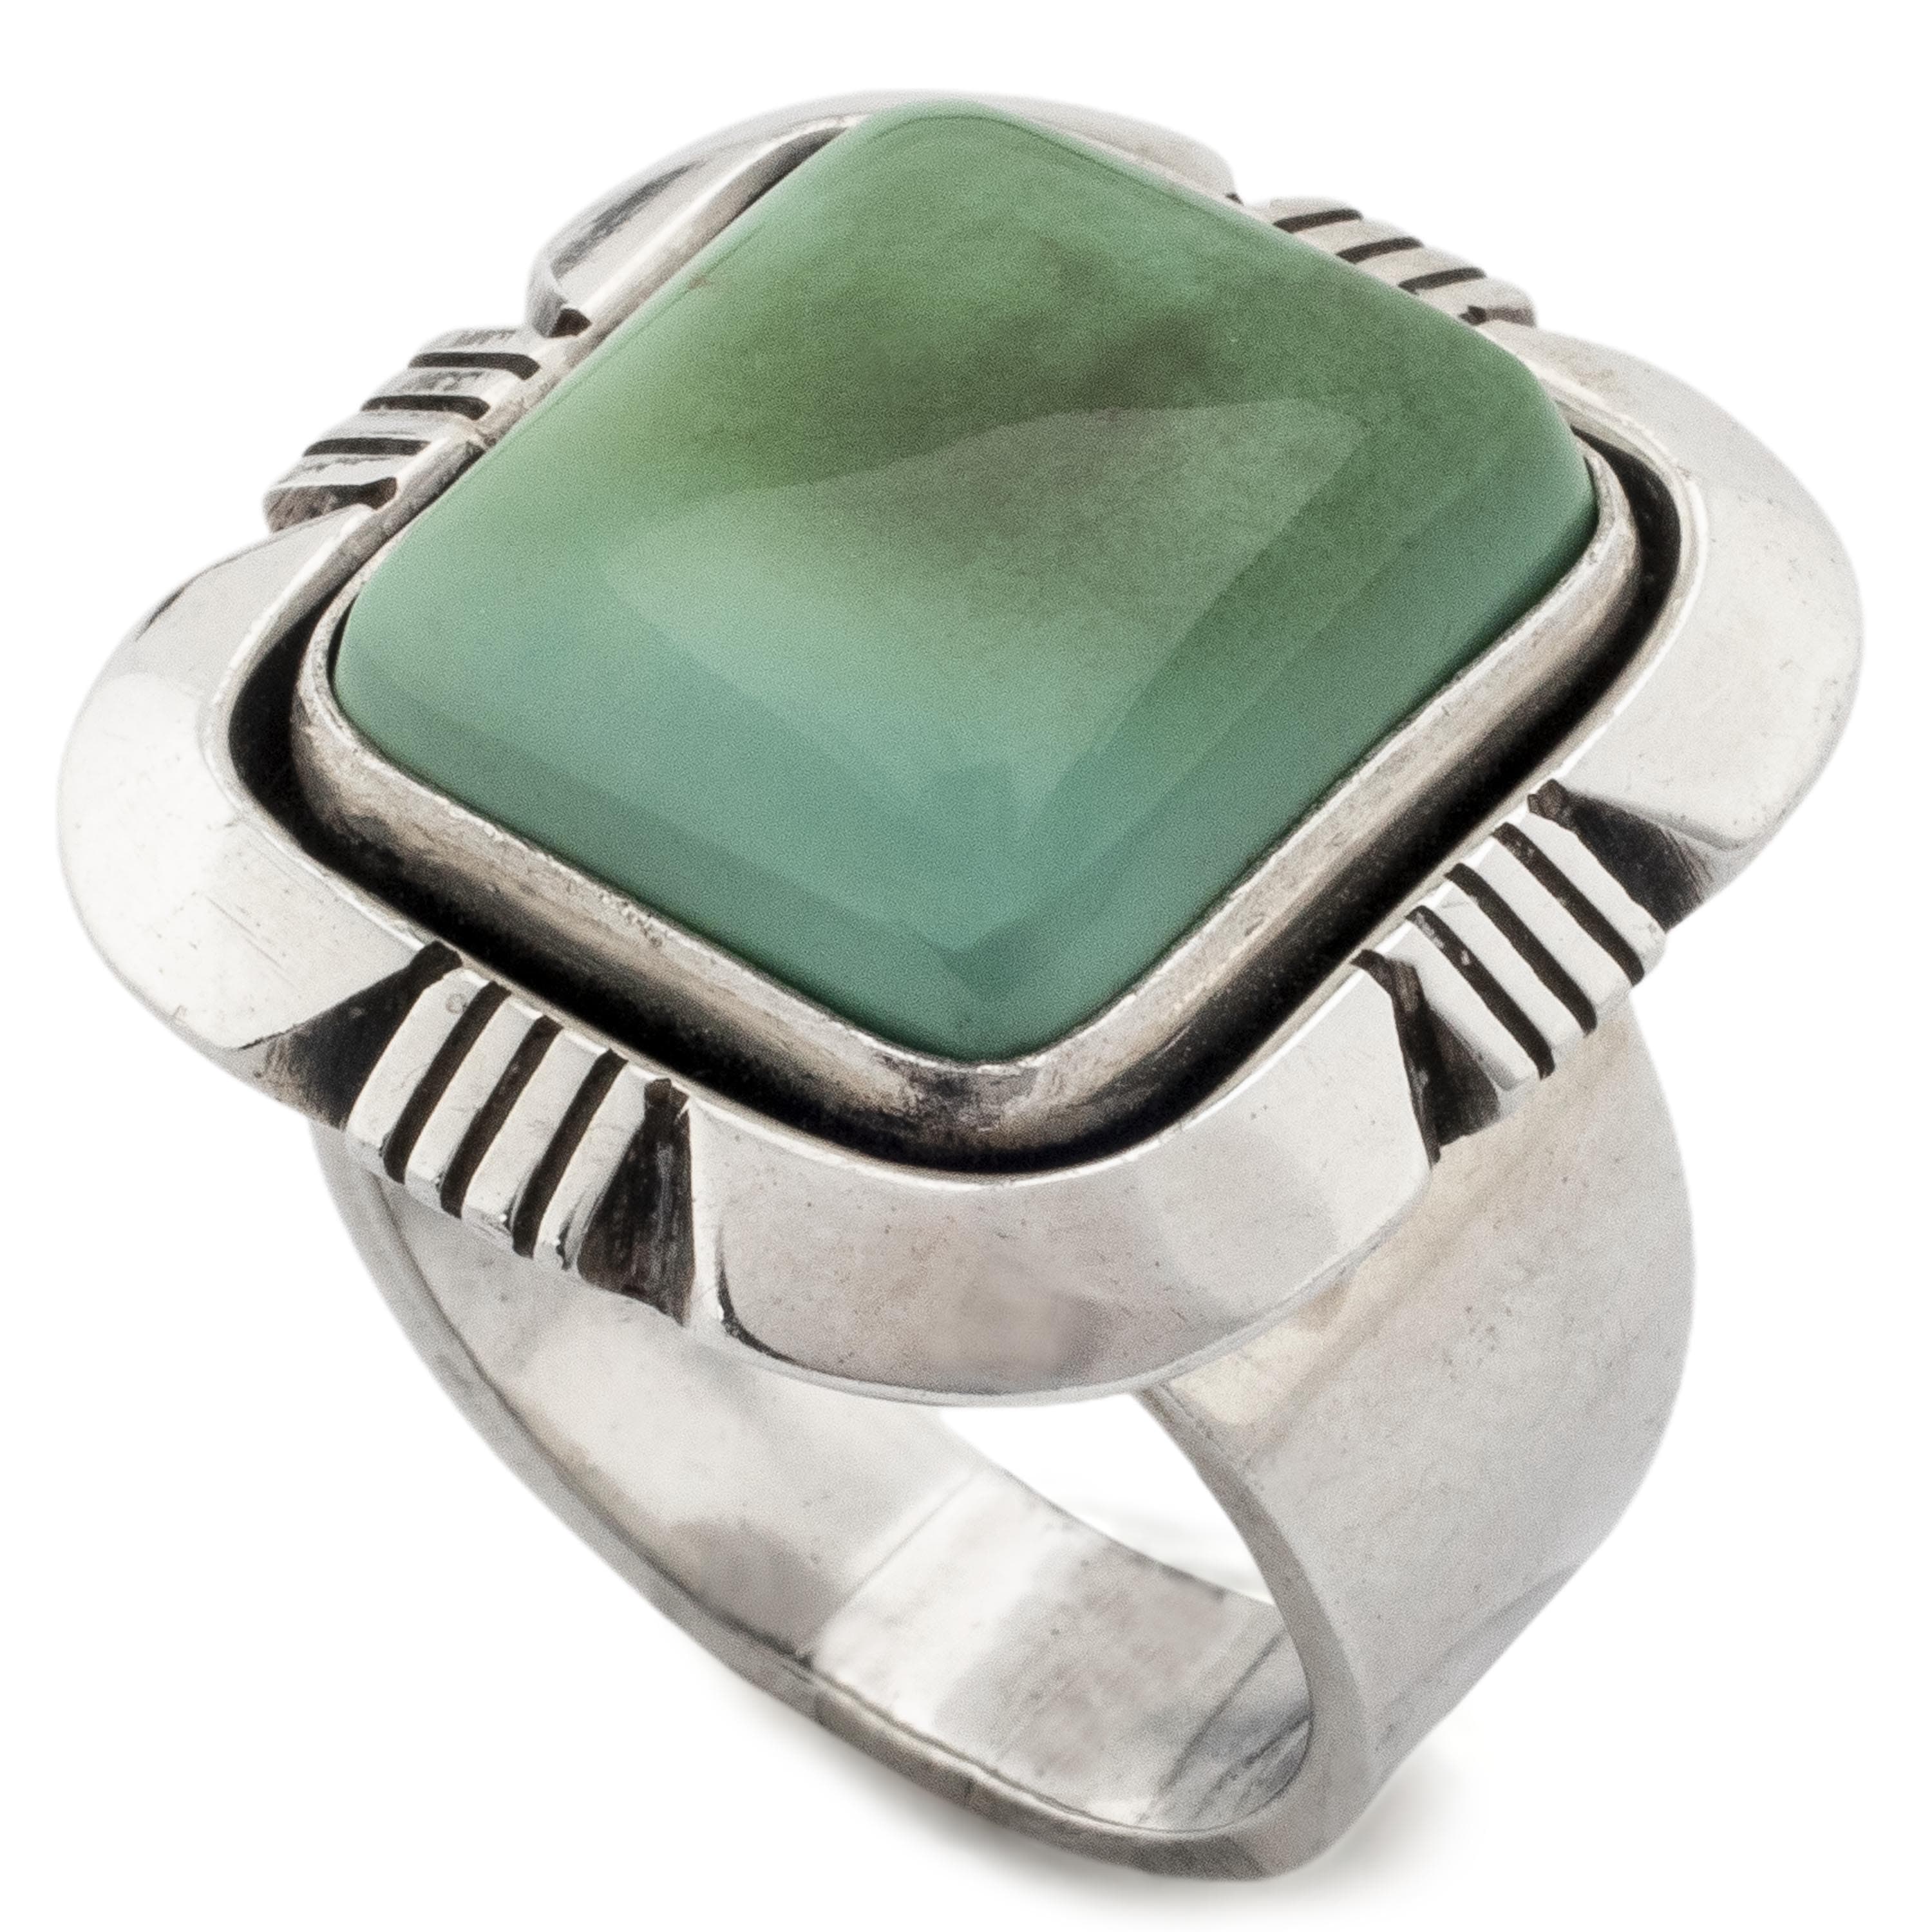 Kalifano Native American Jewelry 6 Eddie Secatero Royston Turquoise Square USA Native American Made 925 Sterling Silver Ring NAR800.023.6